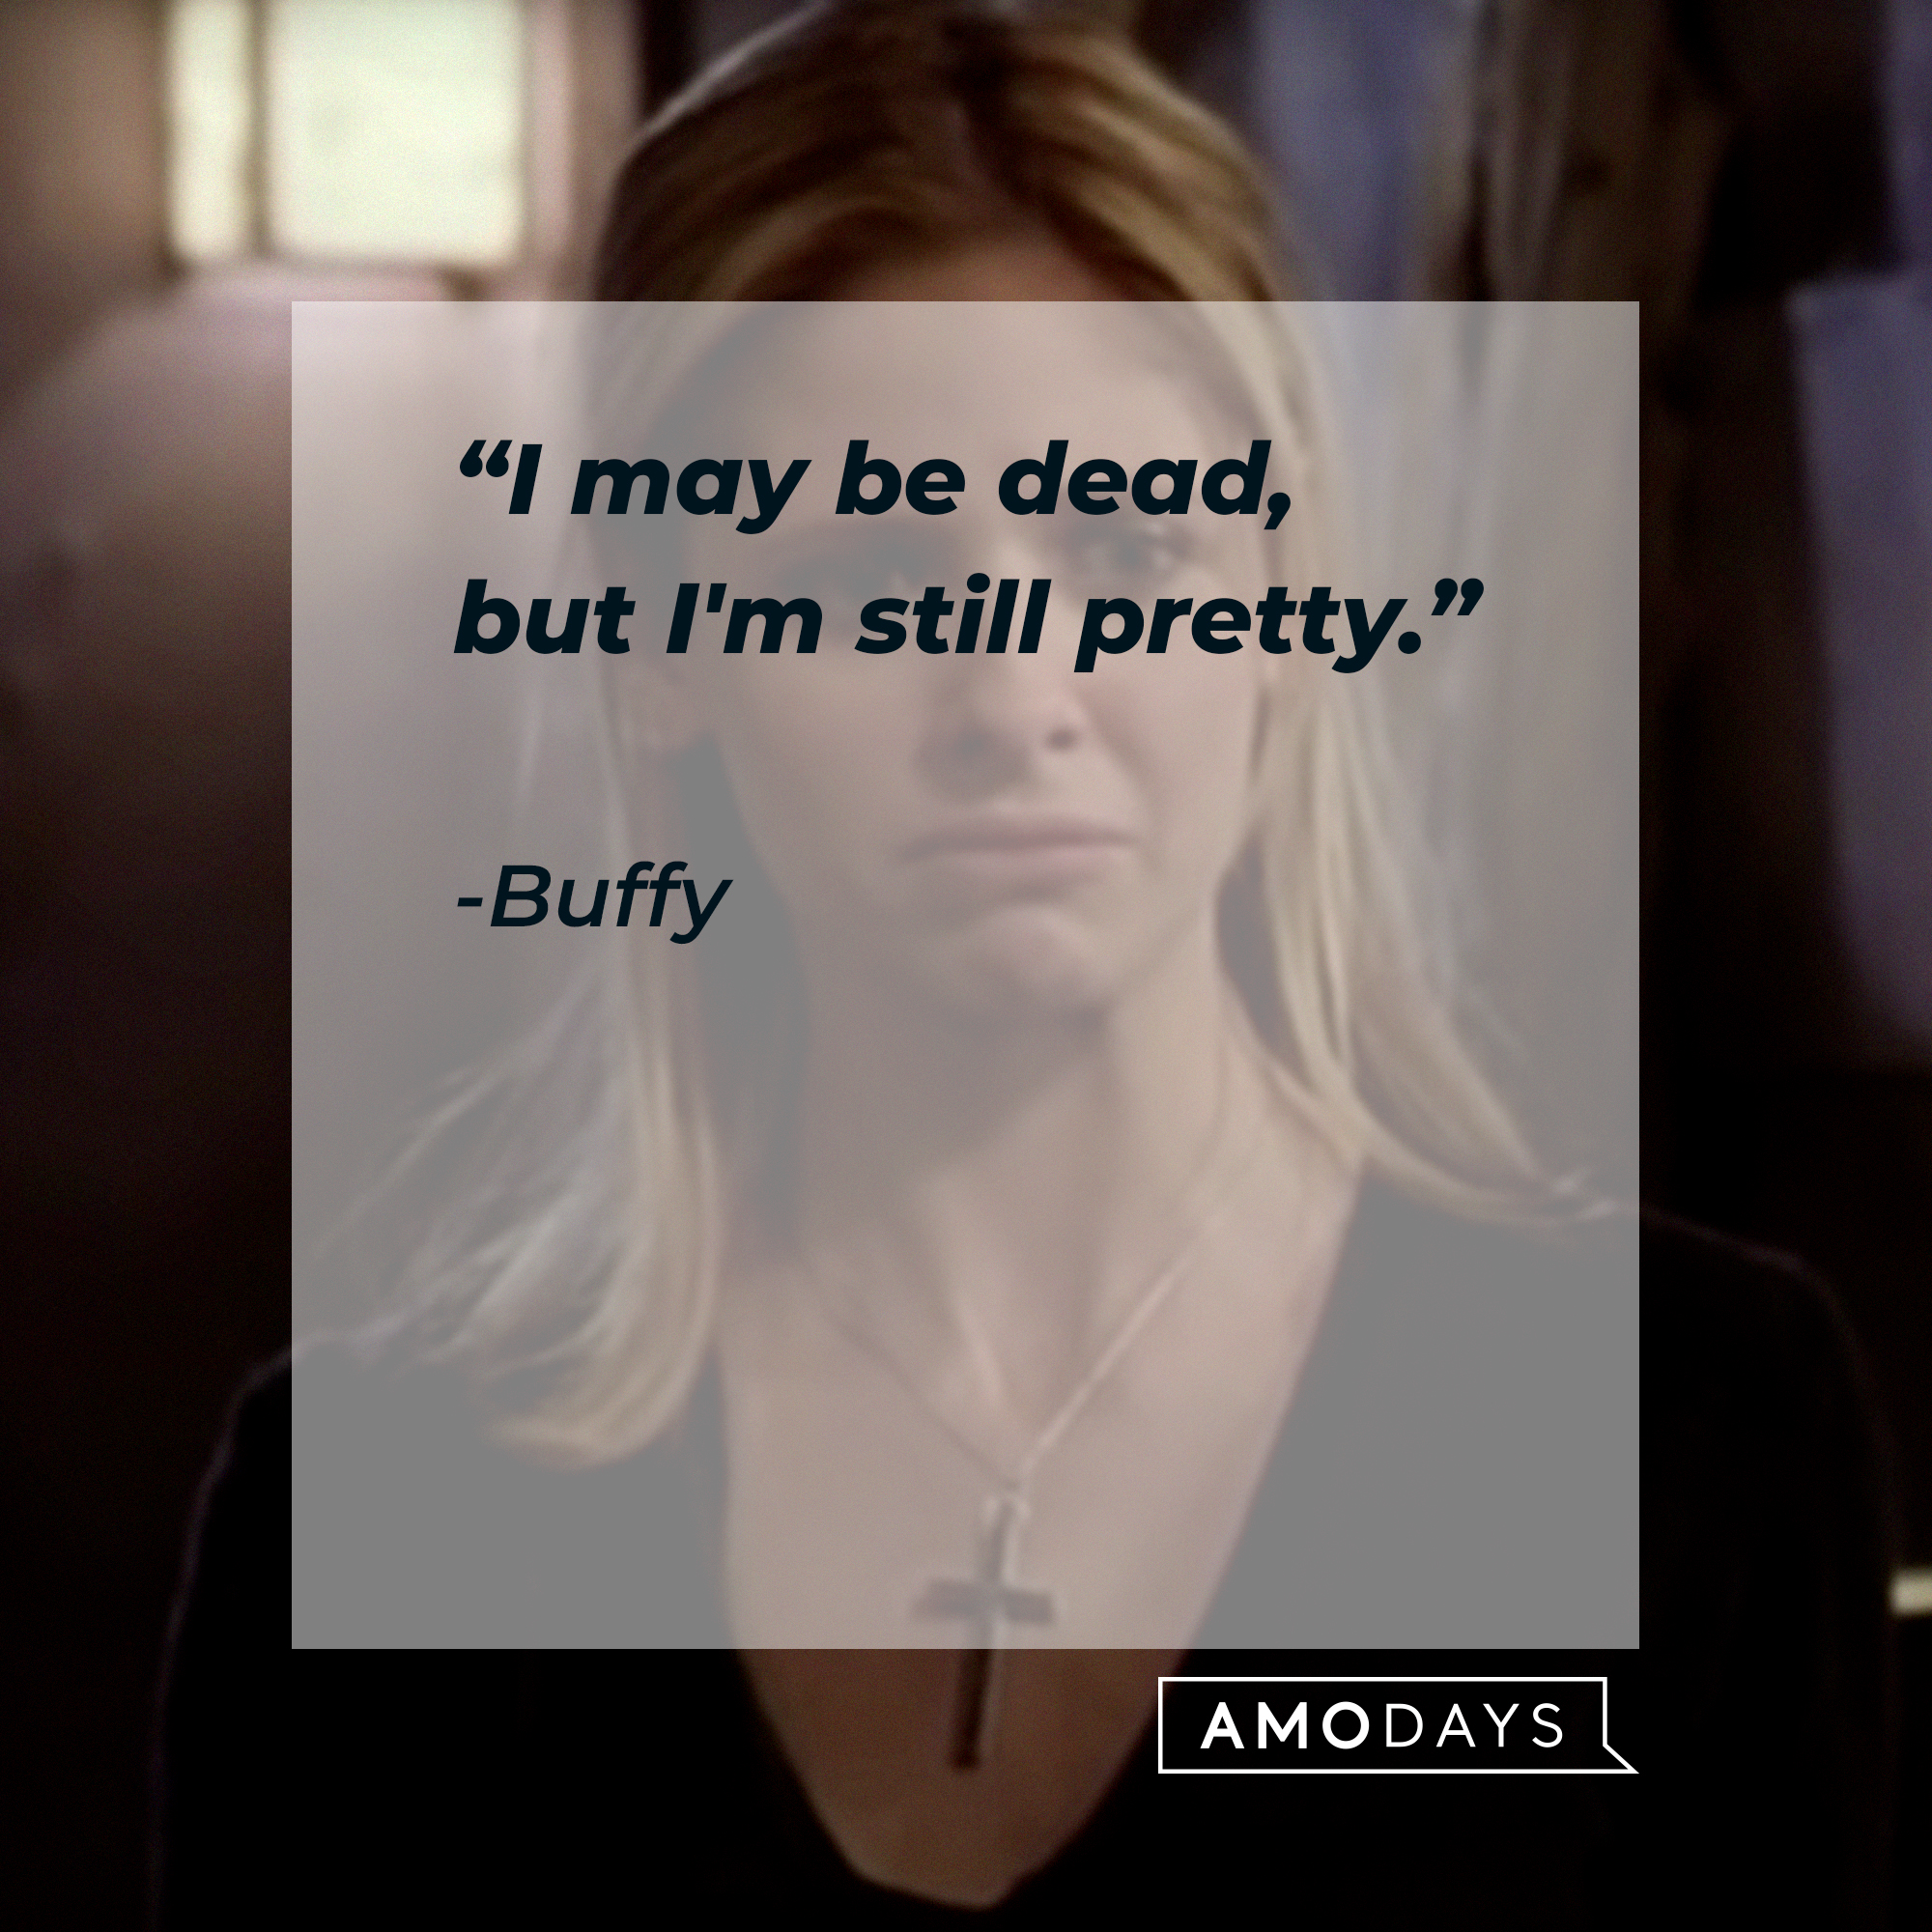 Buffy, with her quote: “I may be dead, but I'm still pretty.” | Source:  facebook.com/BuffyTheVampireSlayer